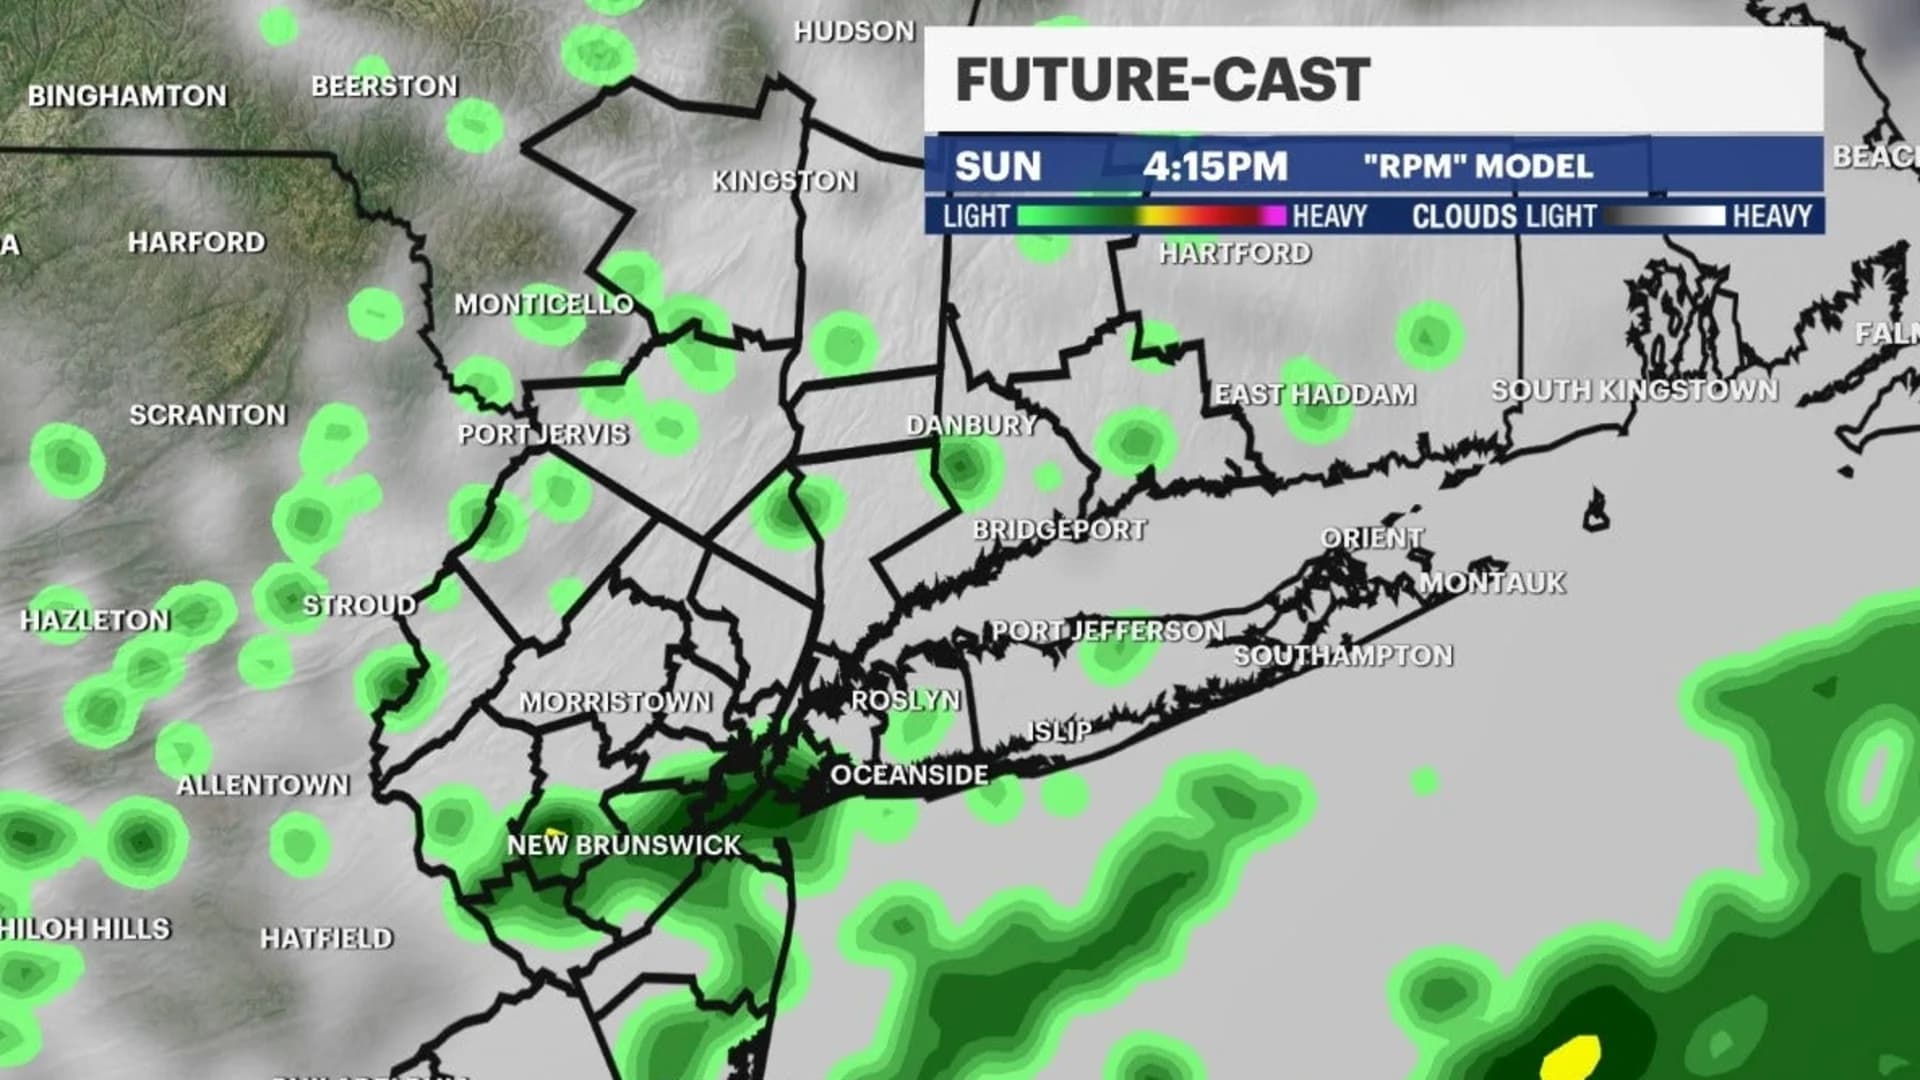 Forecast: Periods of rain today with cooler temps and breezy conditions